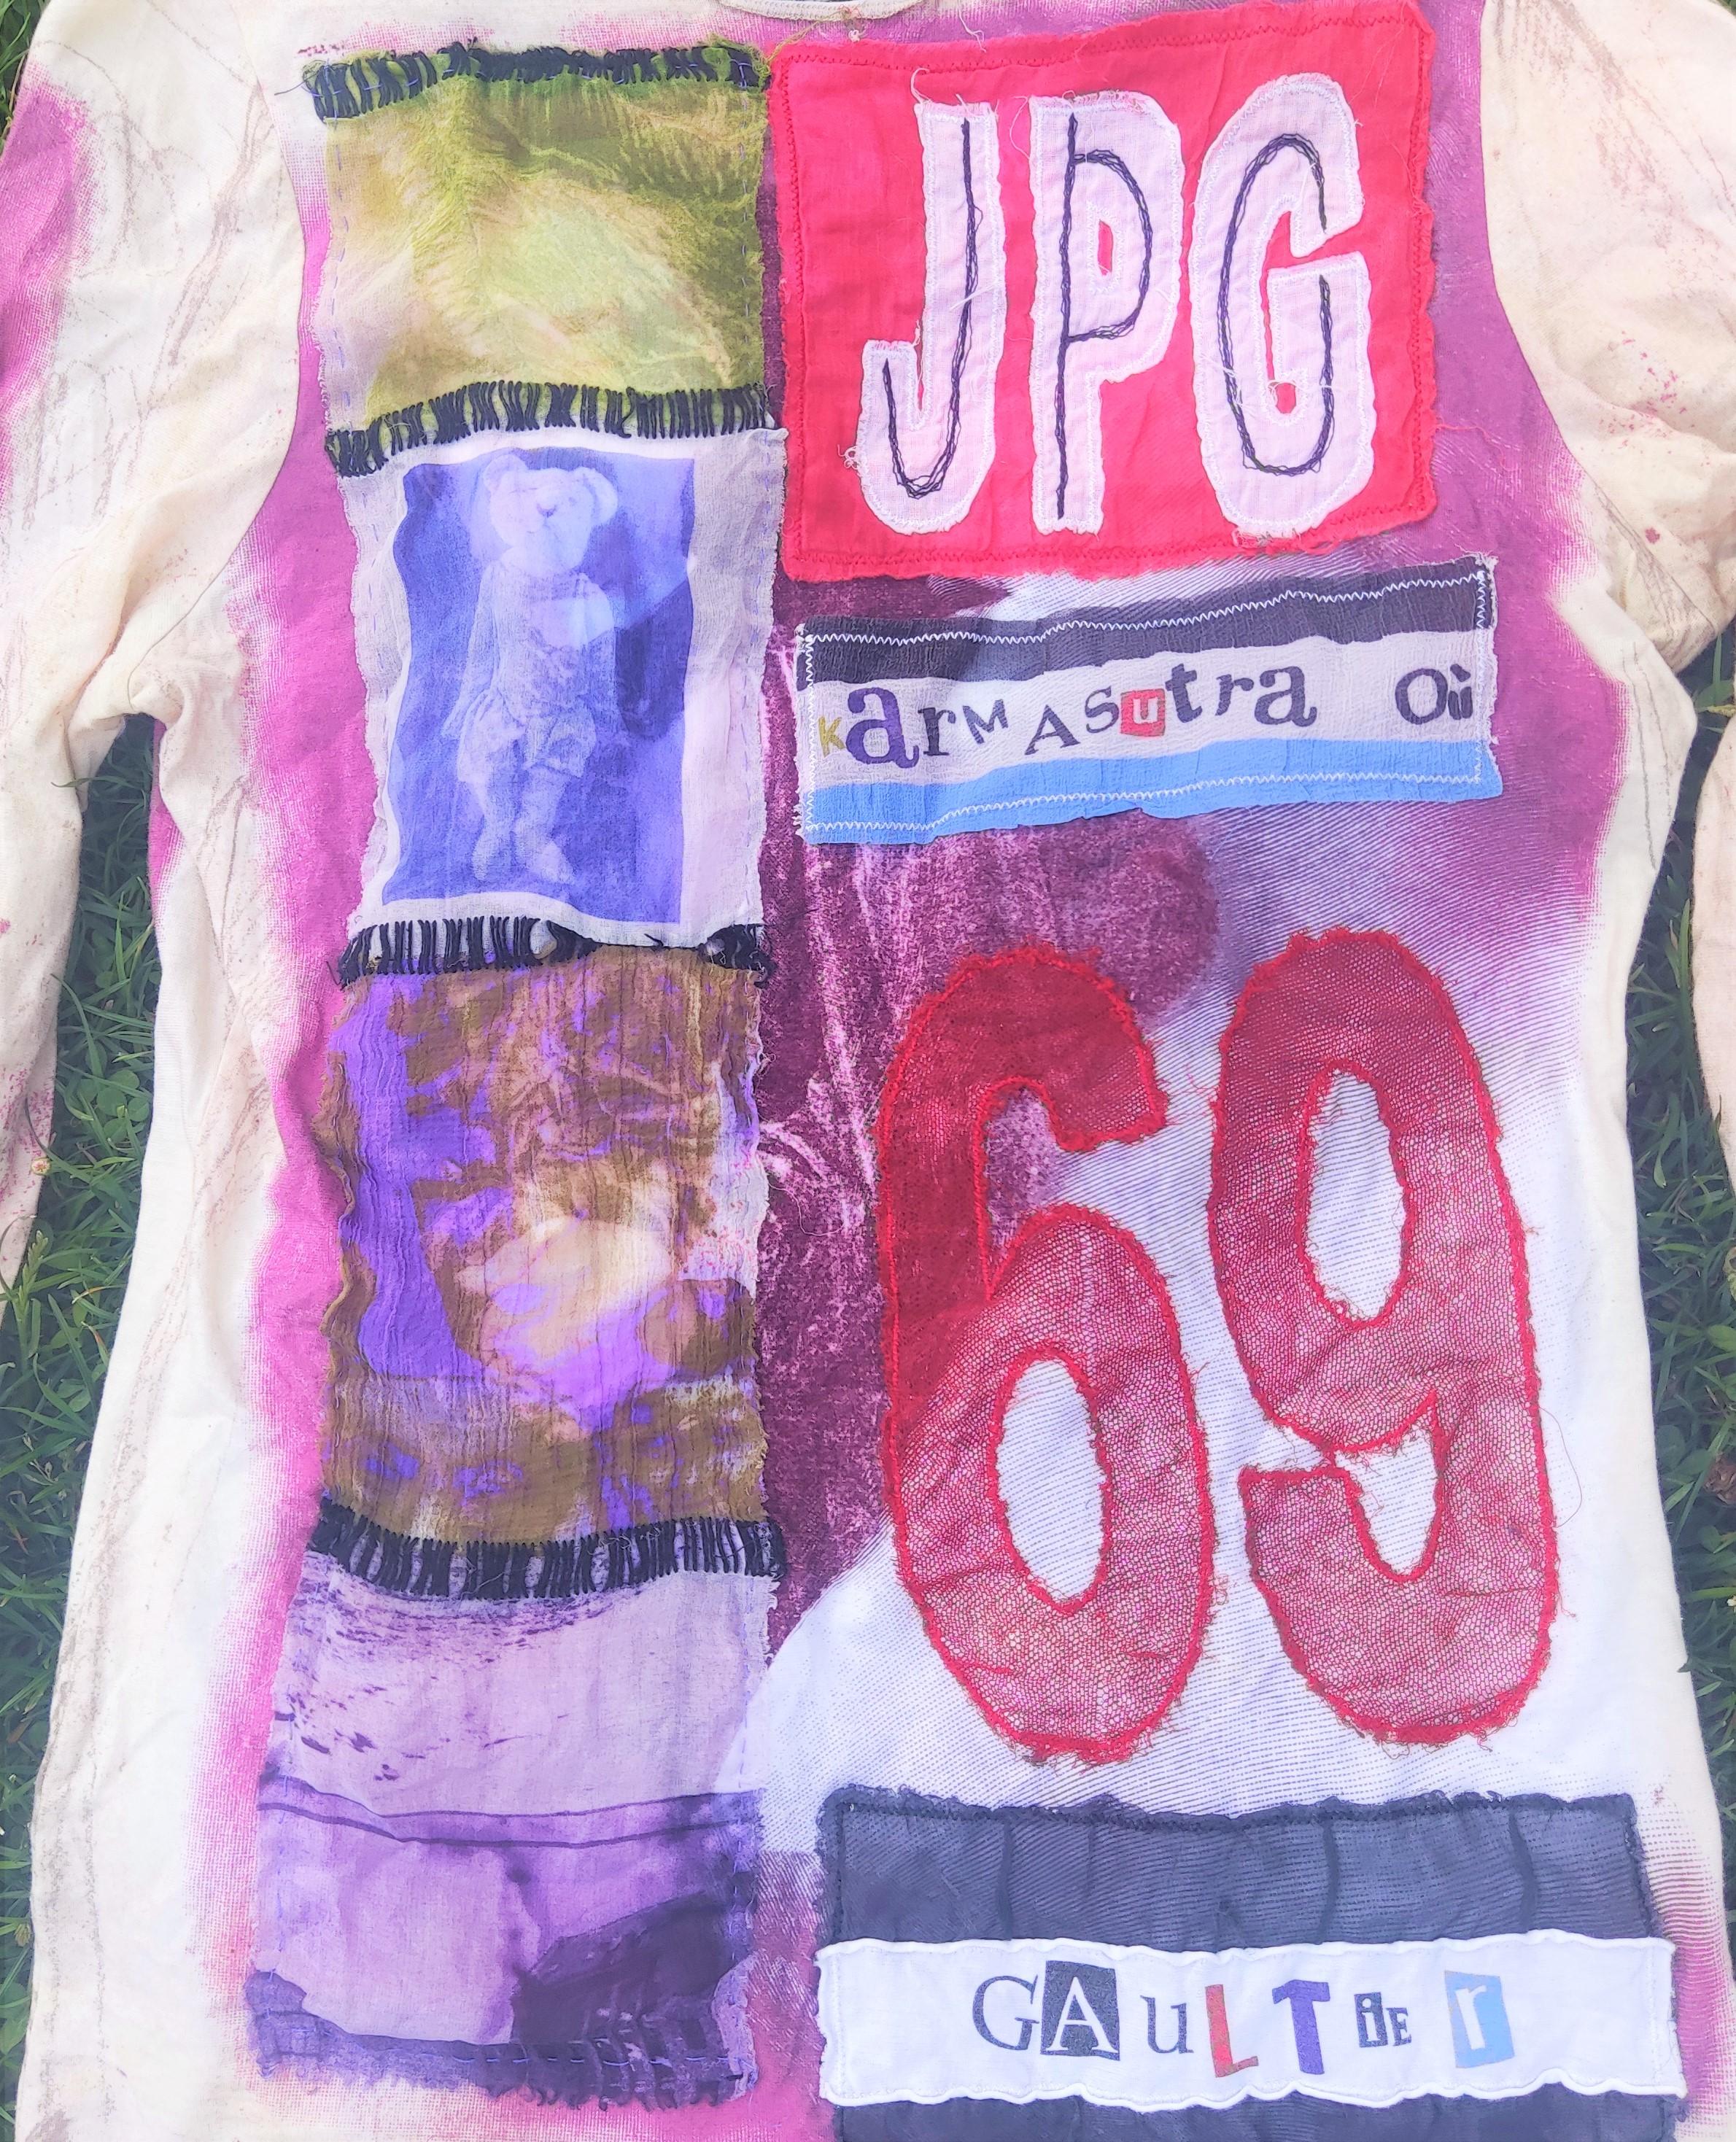 Jean Paul Gaultier Karmasutra Face Portrait Patchwork Patch Work Erotic Tee Top In Excellent Condition For Sale In PARIS, FR